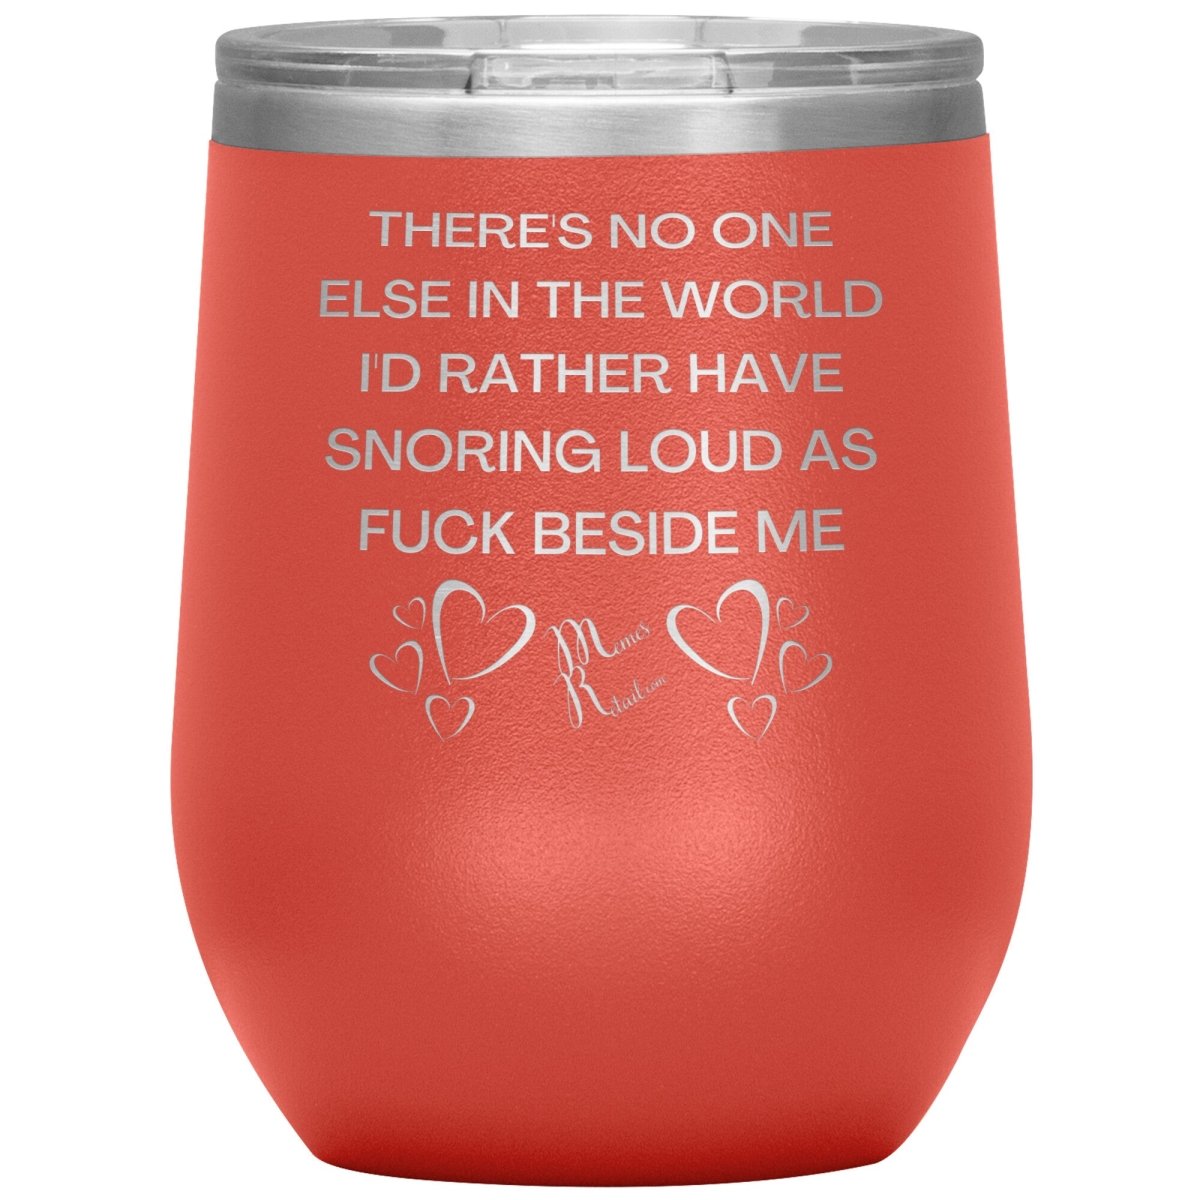 There's No One Else in the World I'd Rather Have Snoring Loud, 12oz Wine Insulated Tumbler / Coral - MemesRetail.com